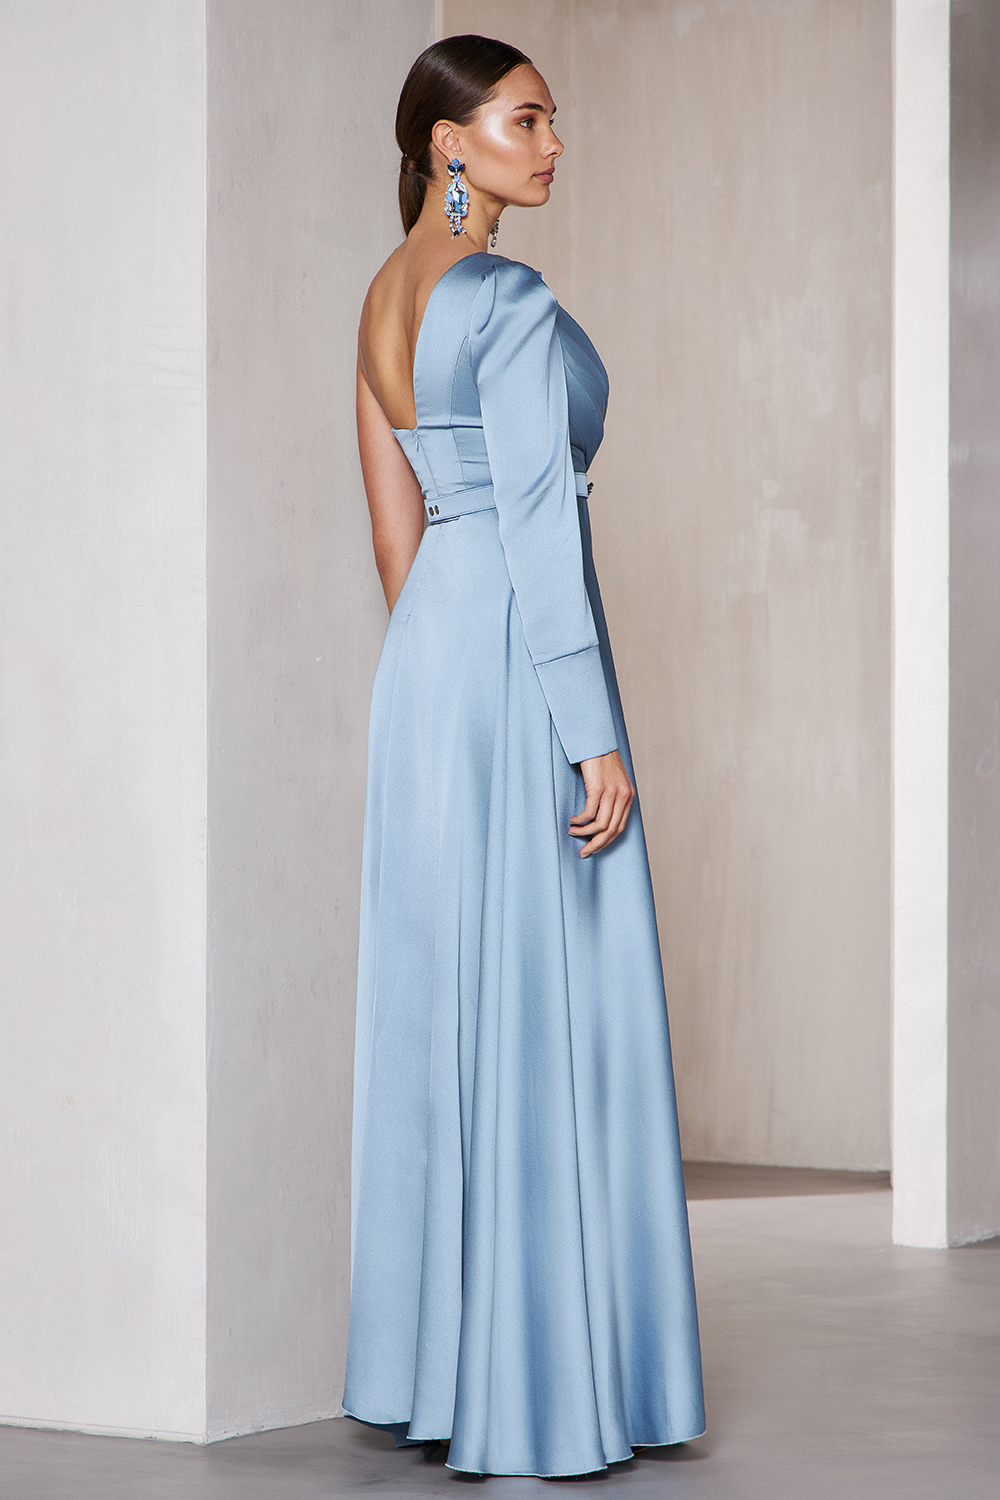 Evening Dresses / One shoulder cocktail long satin dress with long sleeve and belt at the waist